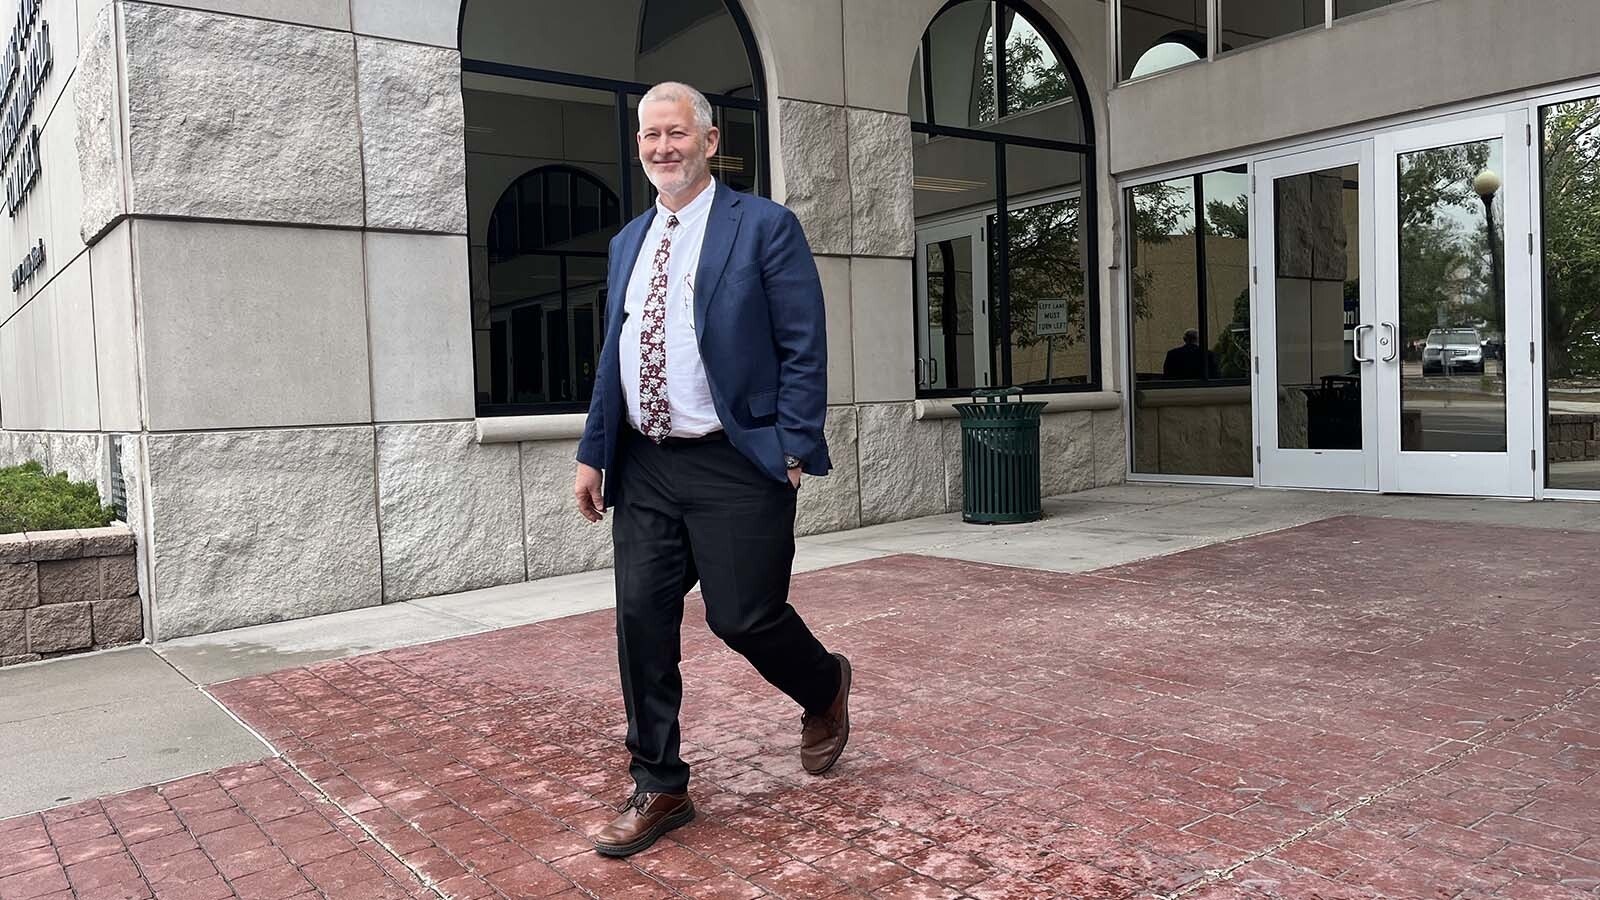 Former Wyoming Superintendent of Public Instruction Brian Schroeder walks out of the Laramie County courthouse and government complex in downtown Cheyenne after a court hearing.